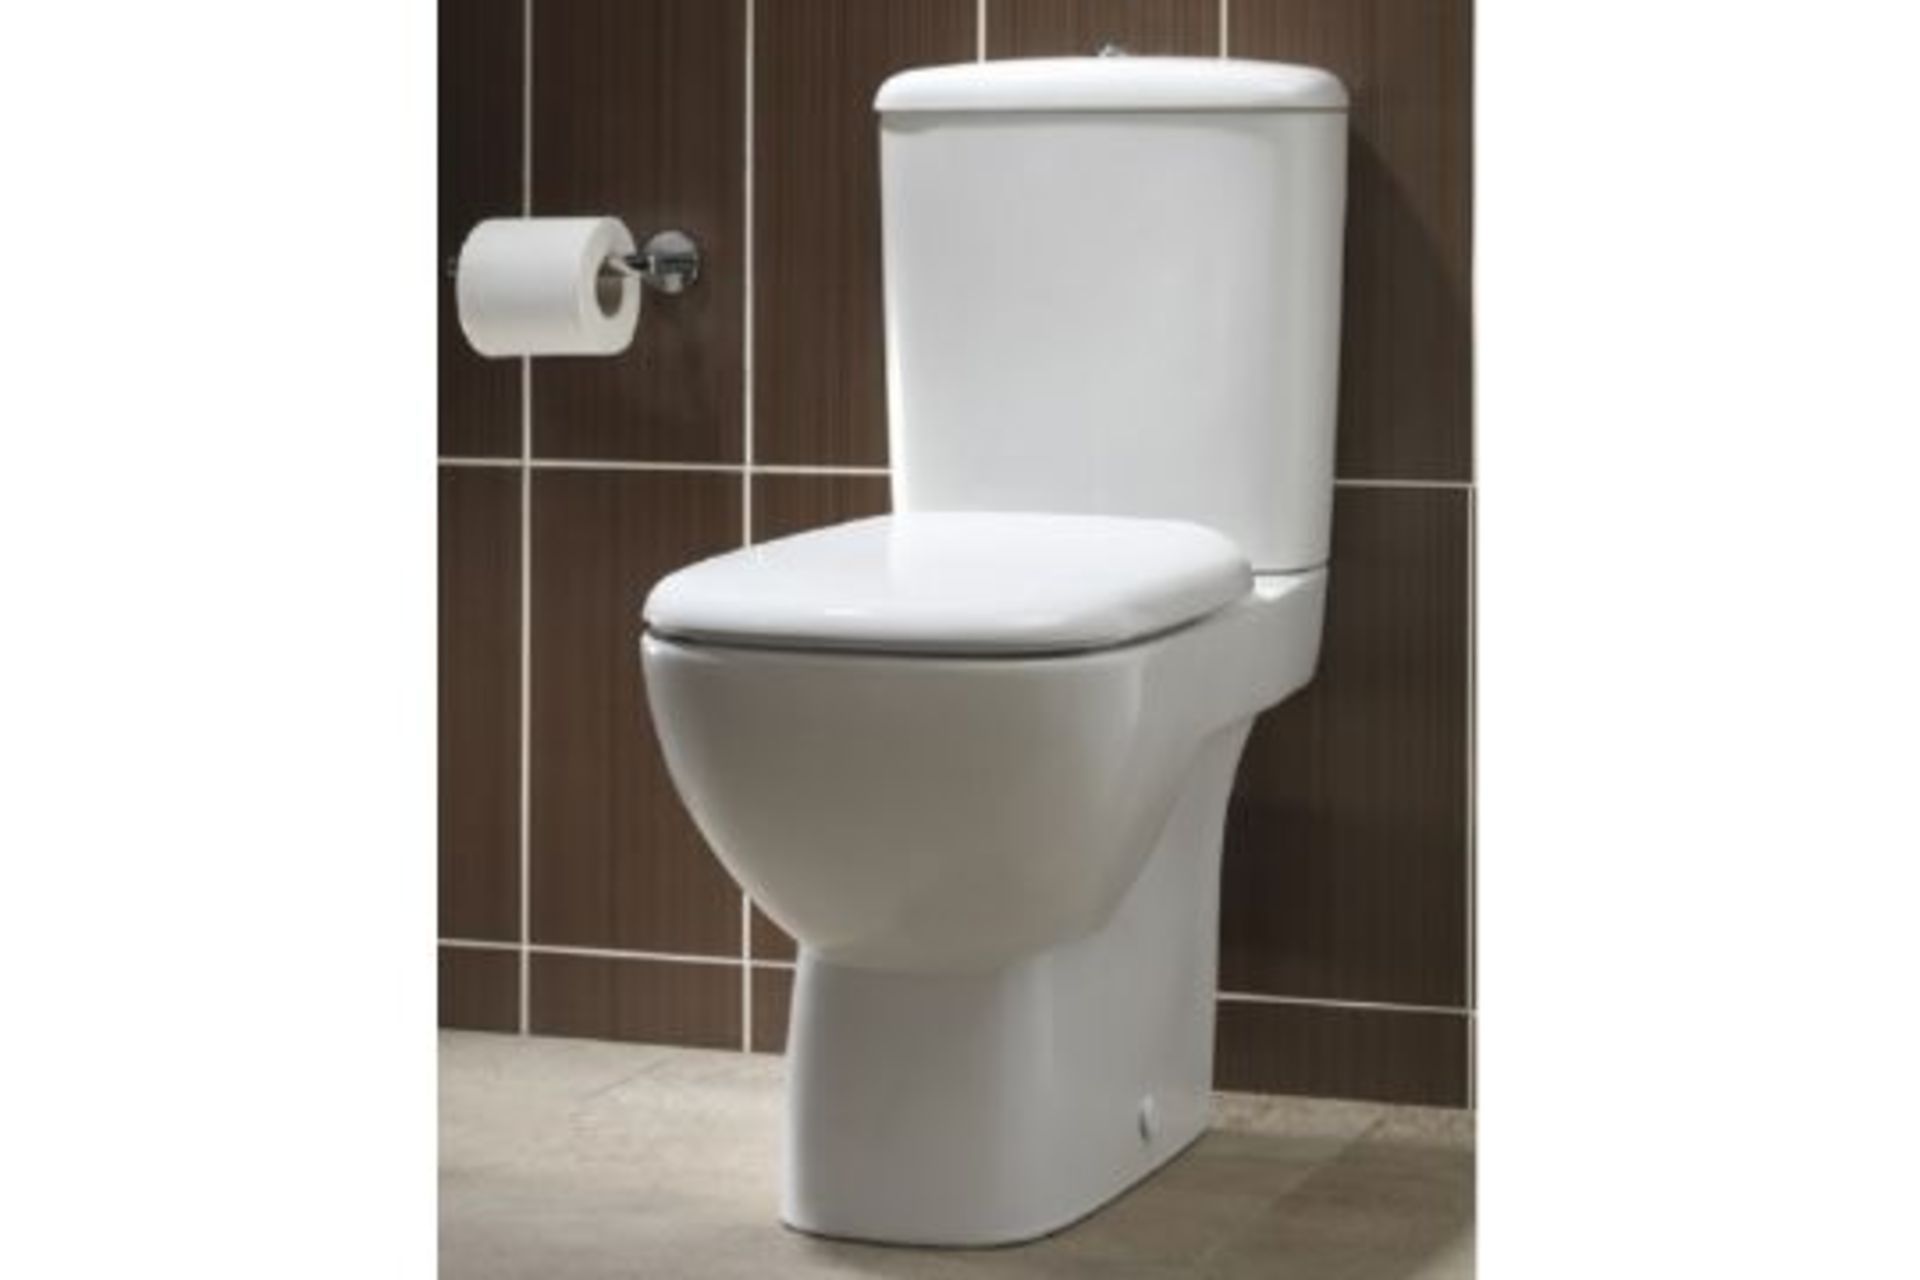 New Twyford Moda Close Coupled WC Rrp £636.99.The Moda Close Coupled Toilet Is A Stylish And E... - Image 2 of 2